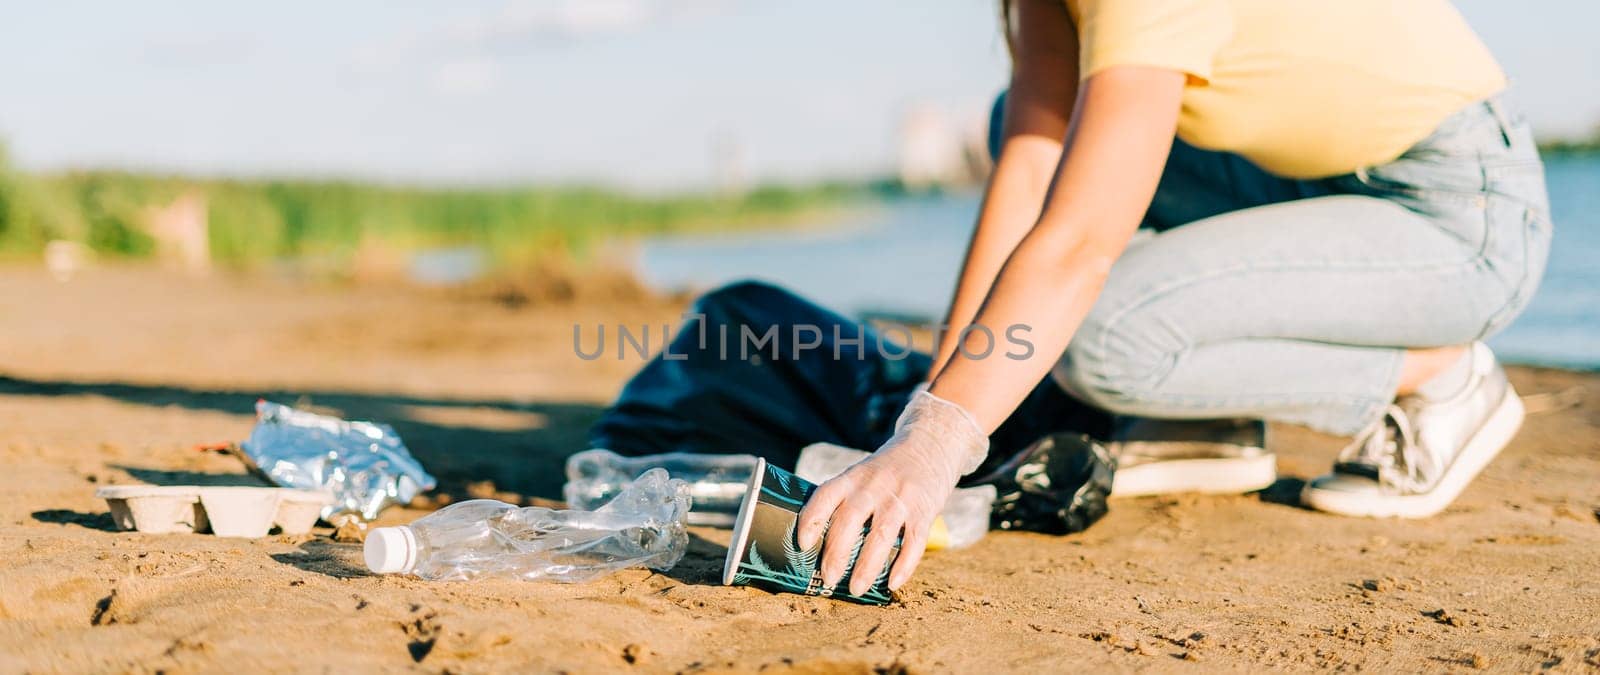 Young female volunteer hand satisfied with picking up trash, a plastic bottles and coffee cups, clean up beach with a sea. Woman collecting garbage. Environmental ecology pollution concept. Earth Day.